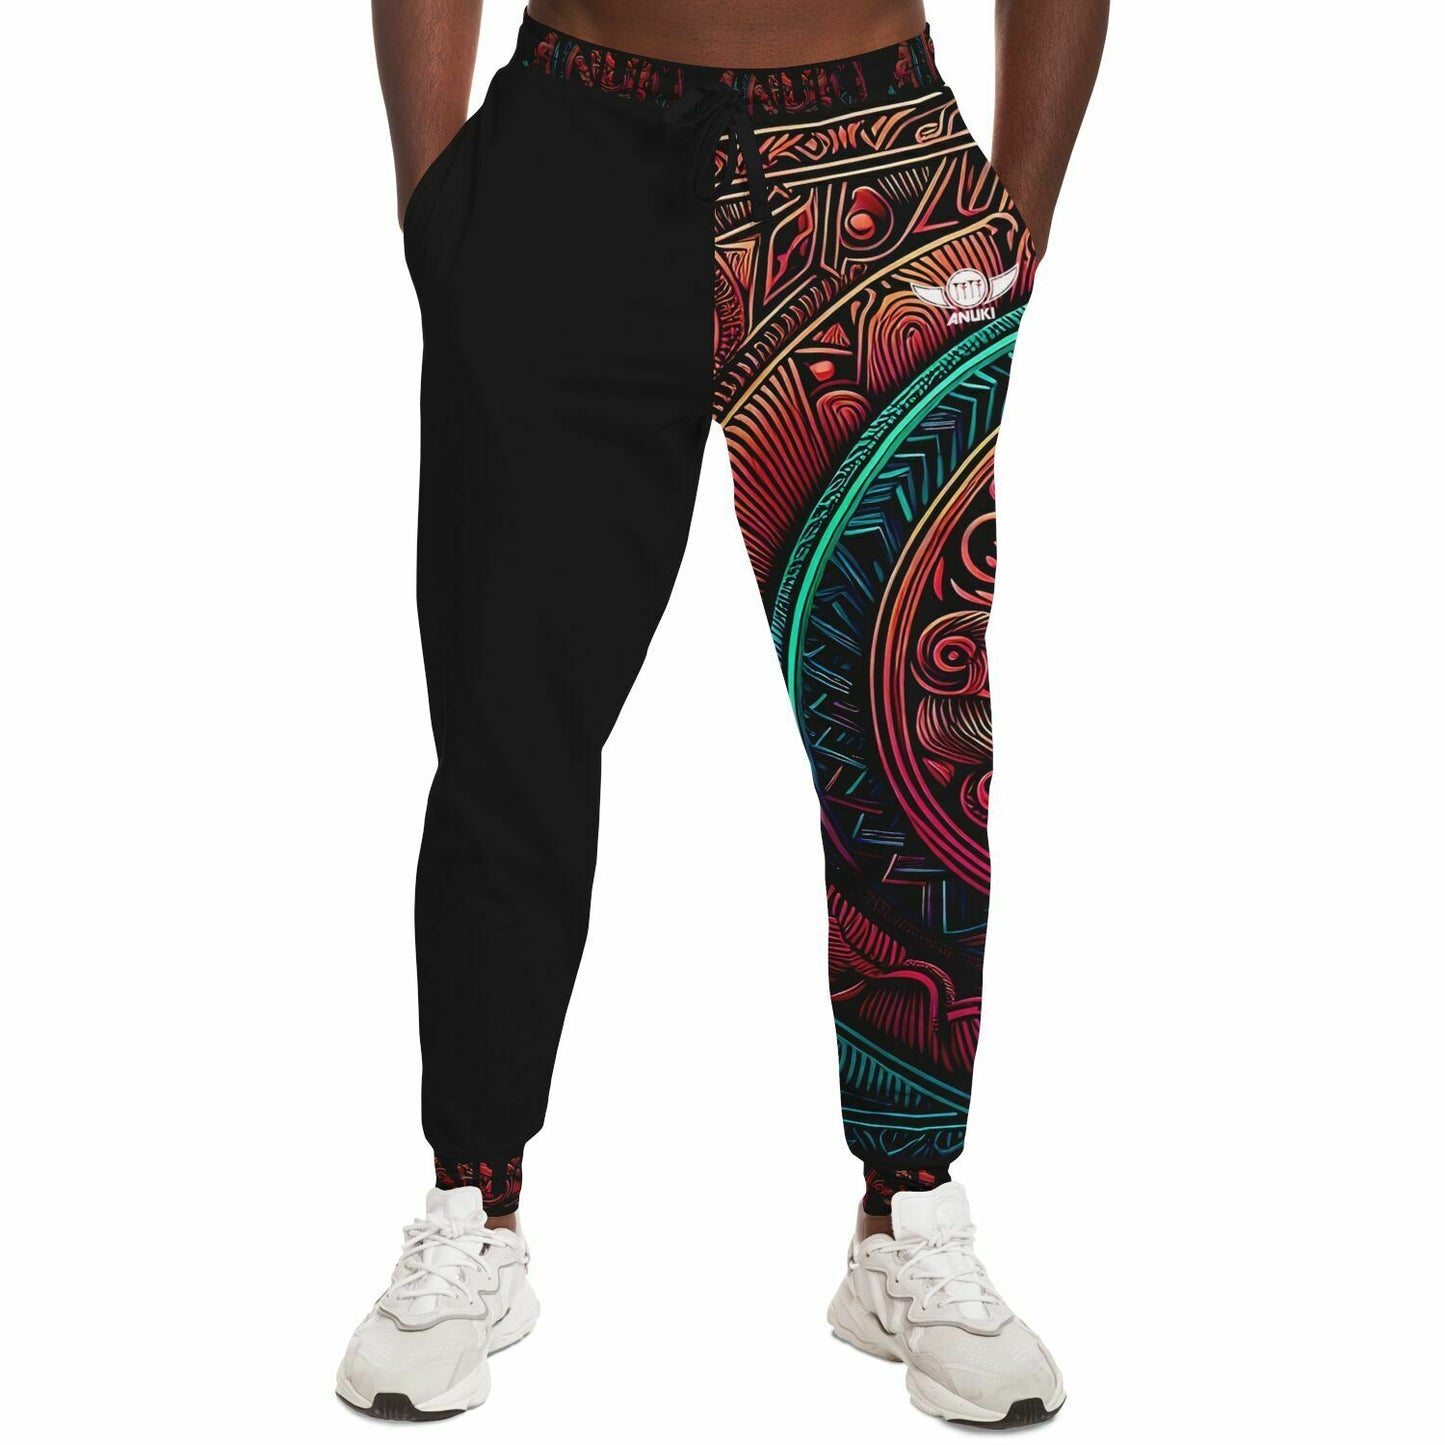 The Dynasty Joggers